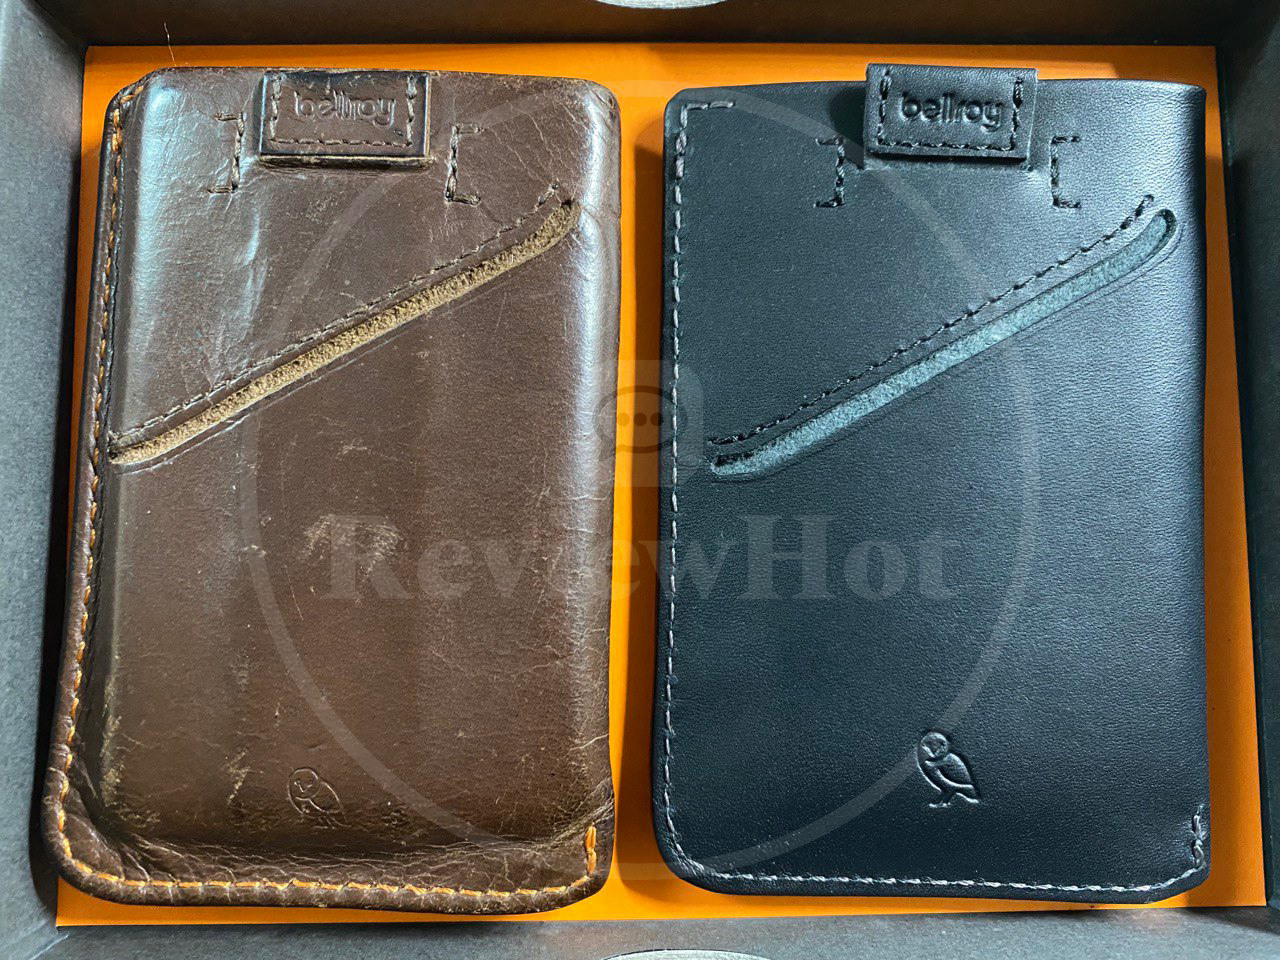 bellroy-card-wallets-old-and-new-comparison